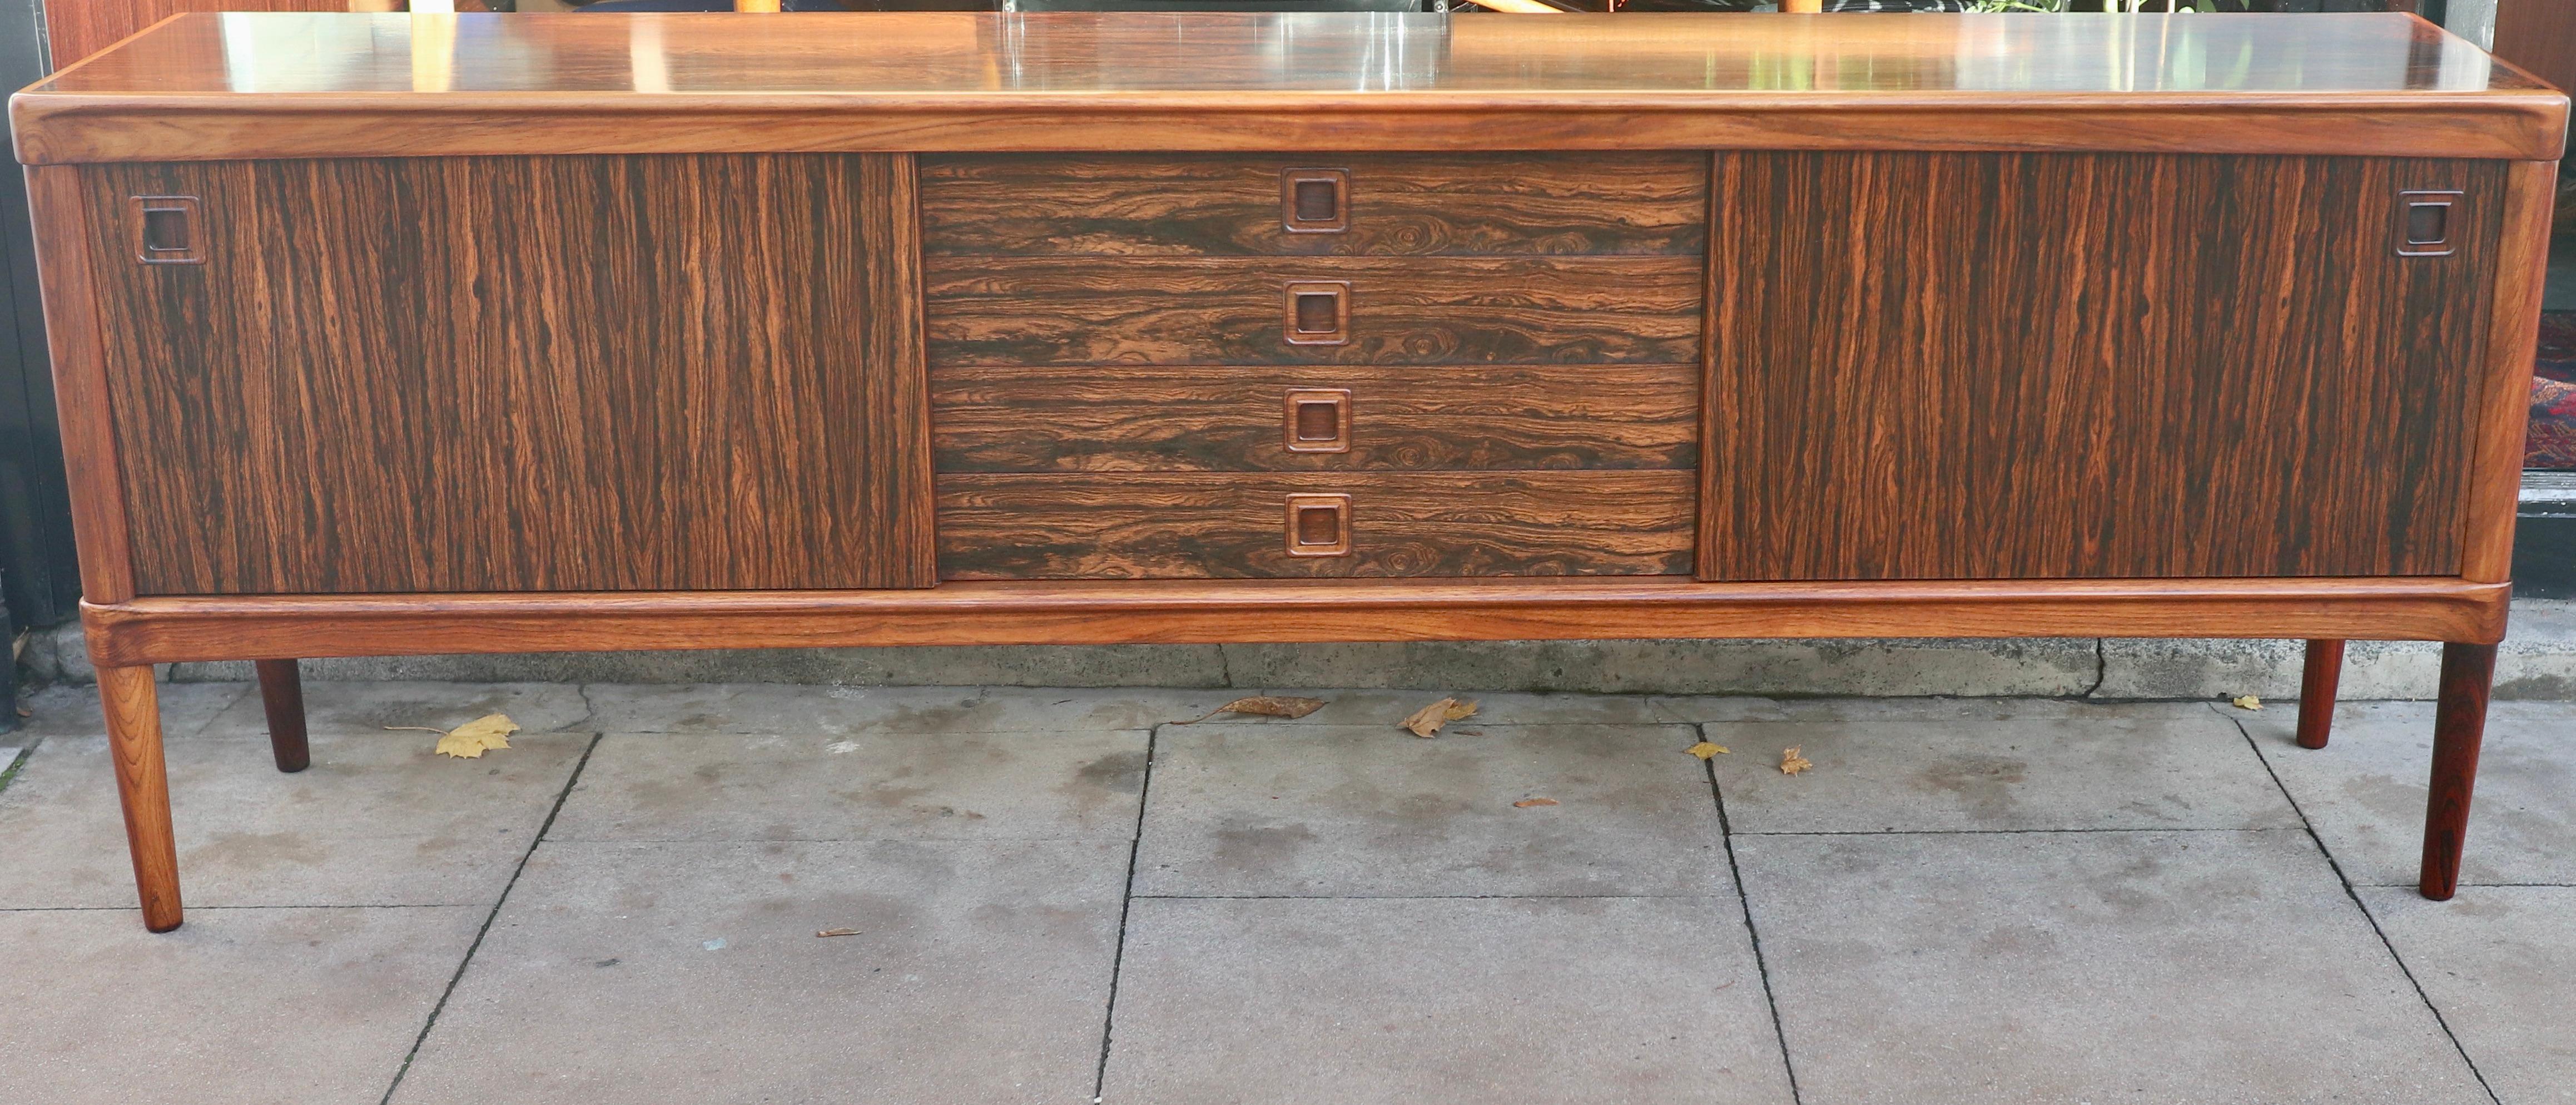 This H W Klein designed sideboard is an exceptional piece of furniture that has stood the test of time. Crafted in the 1960s using top quality materials by highly skilled Danish cabinet makers Bramin, this sideboard is a true testament to classic